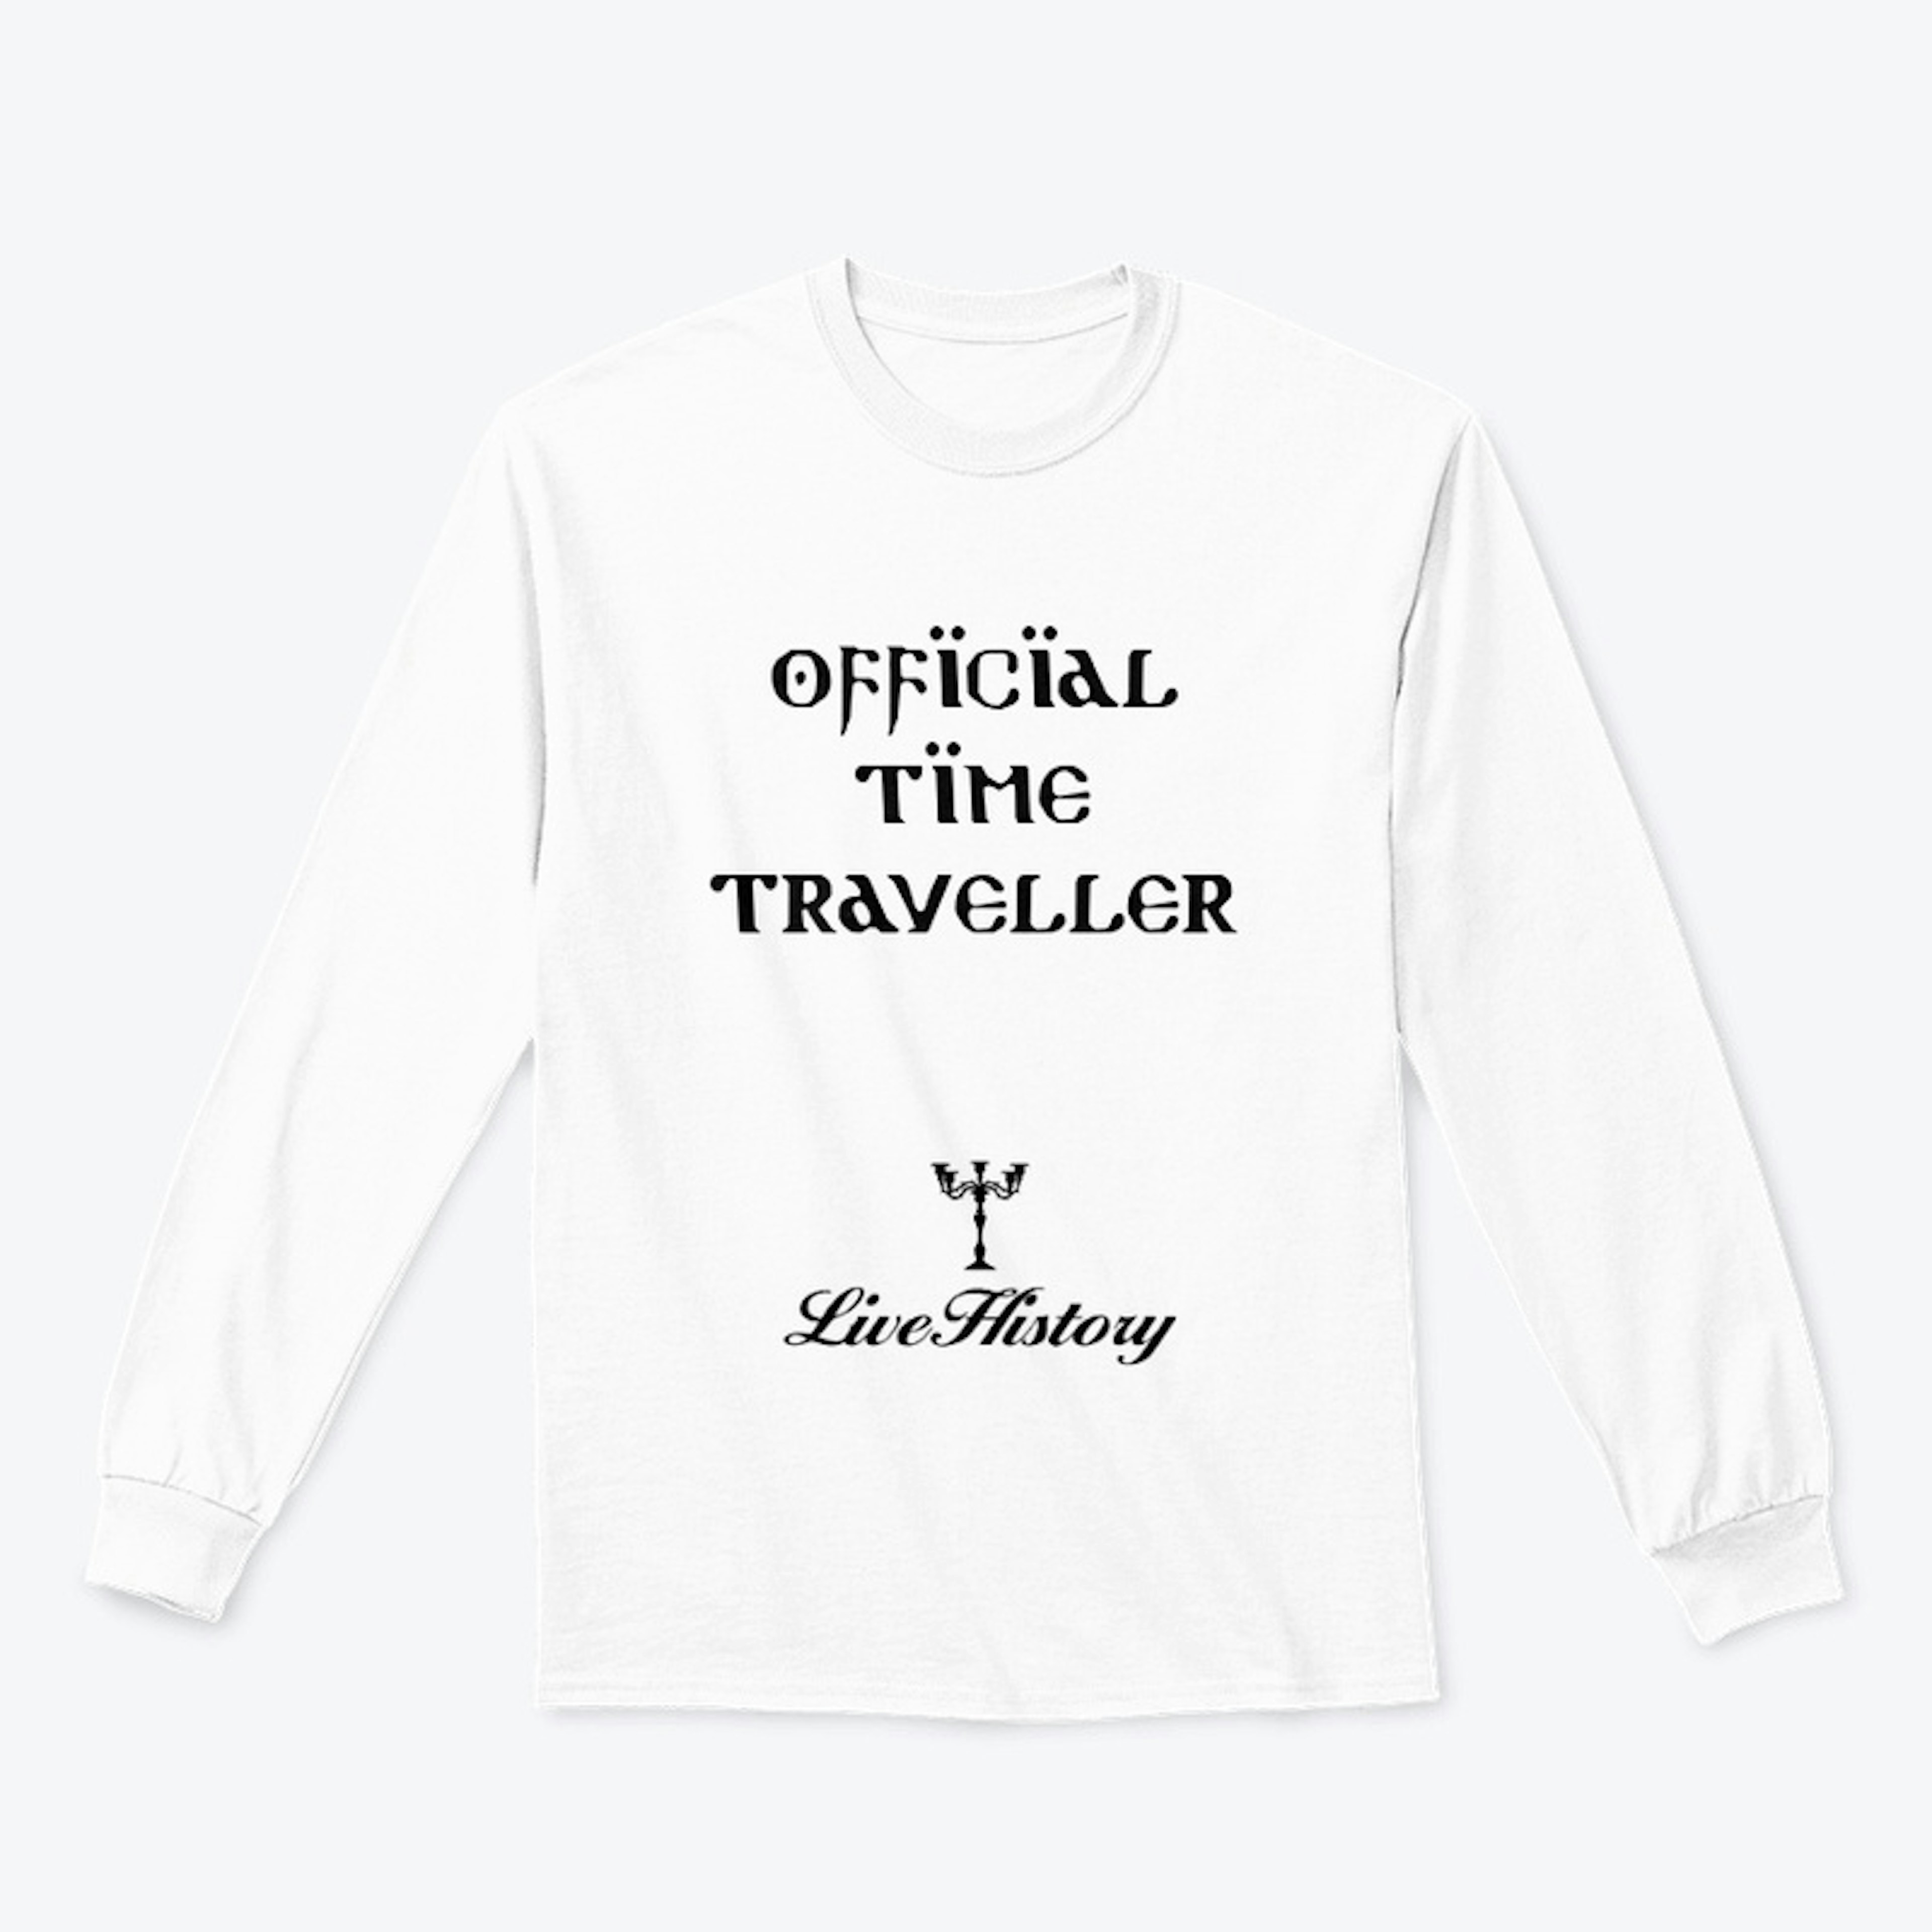 Official time traveller shirts!